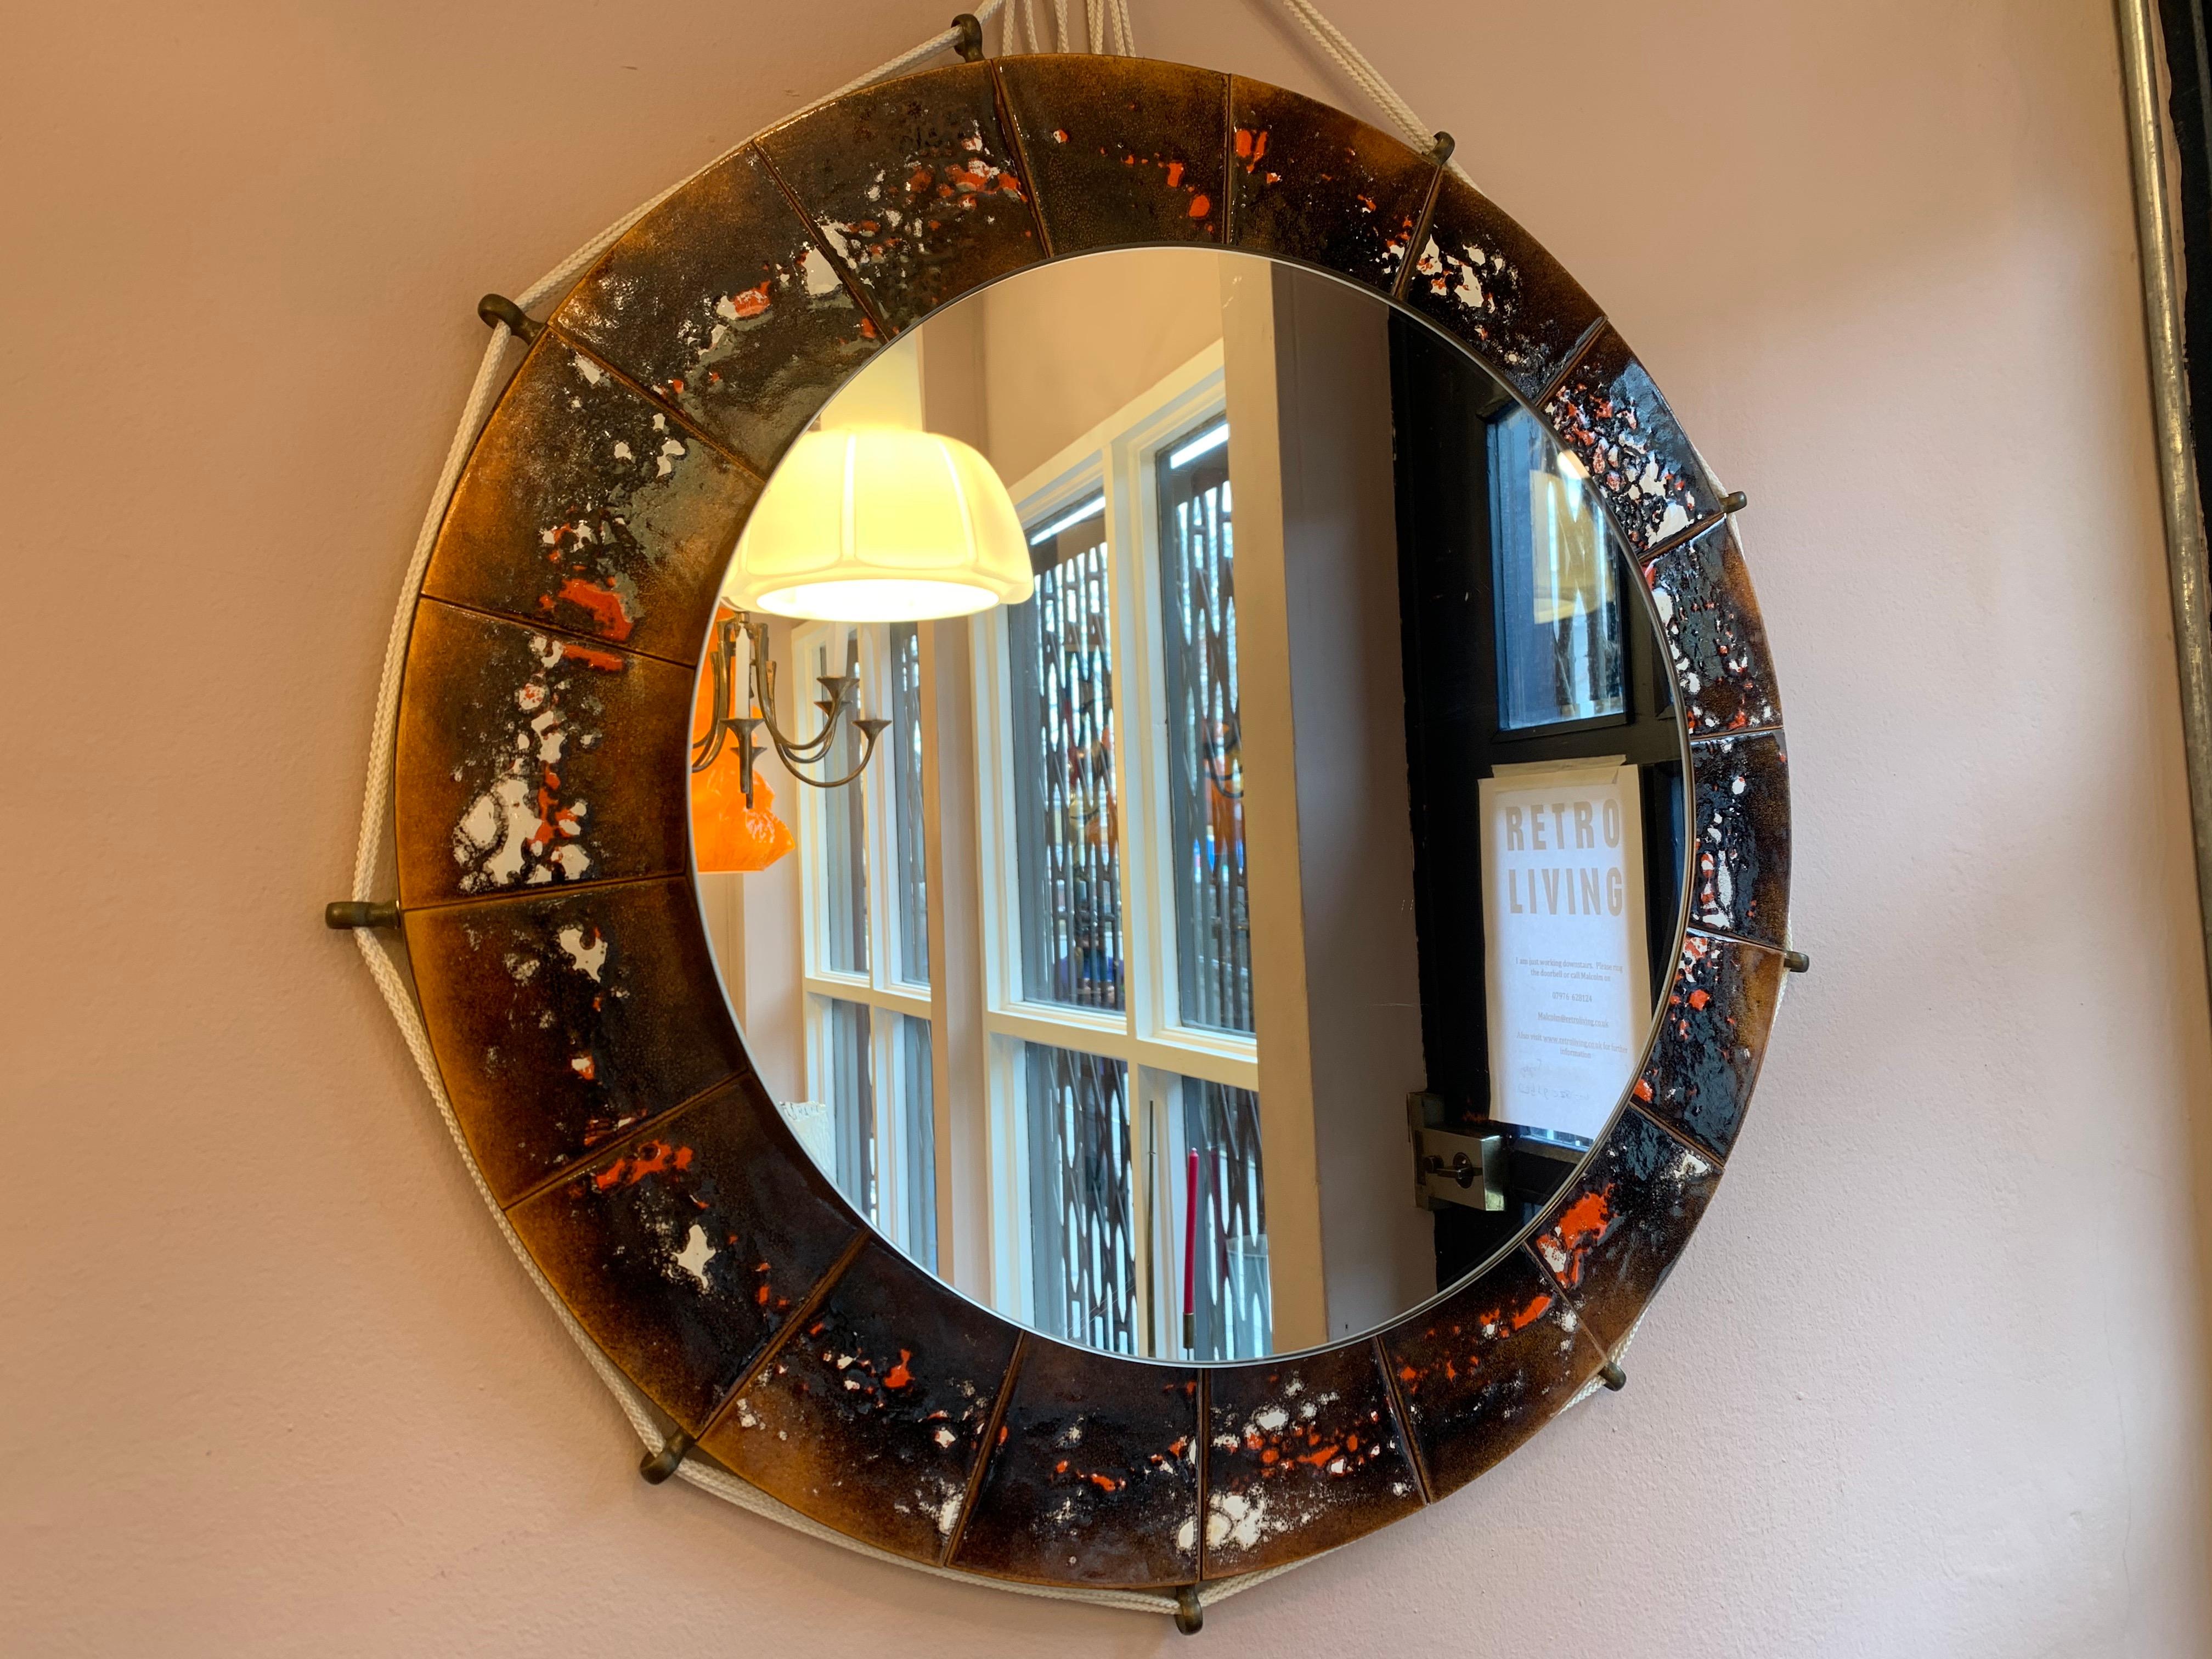 1970s Belgium, ceramic tiled, round, wall-mirror, with brass eye hooks, around its exterior with a white rope threaded through them. The rope connects to a round hook at the top which allows it to be easily hung on the wall. The round mirror stands